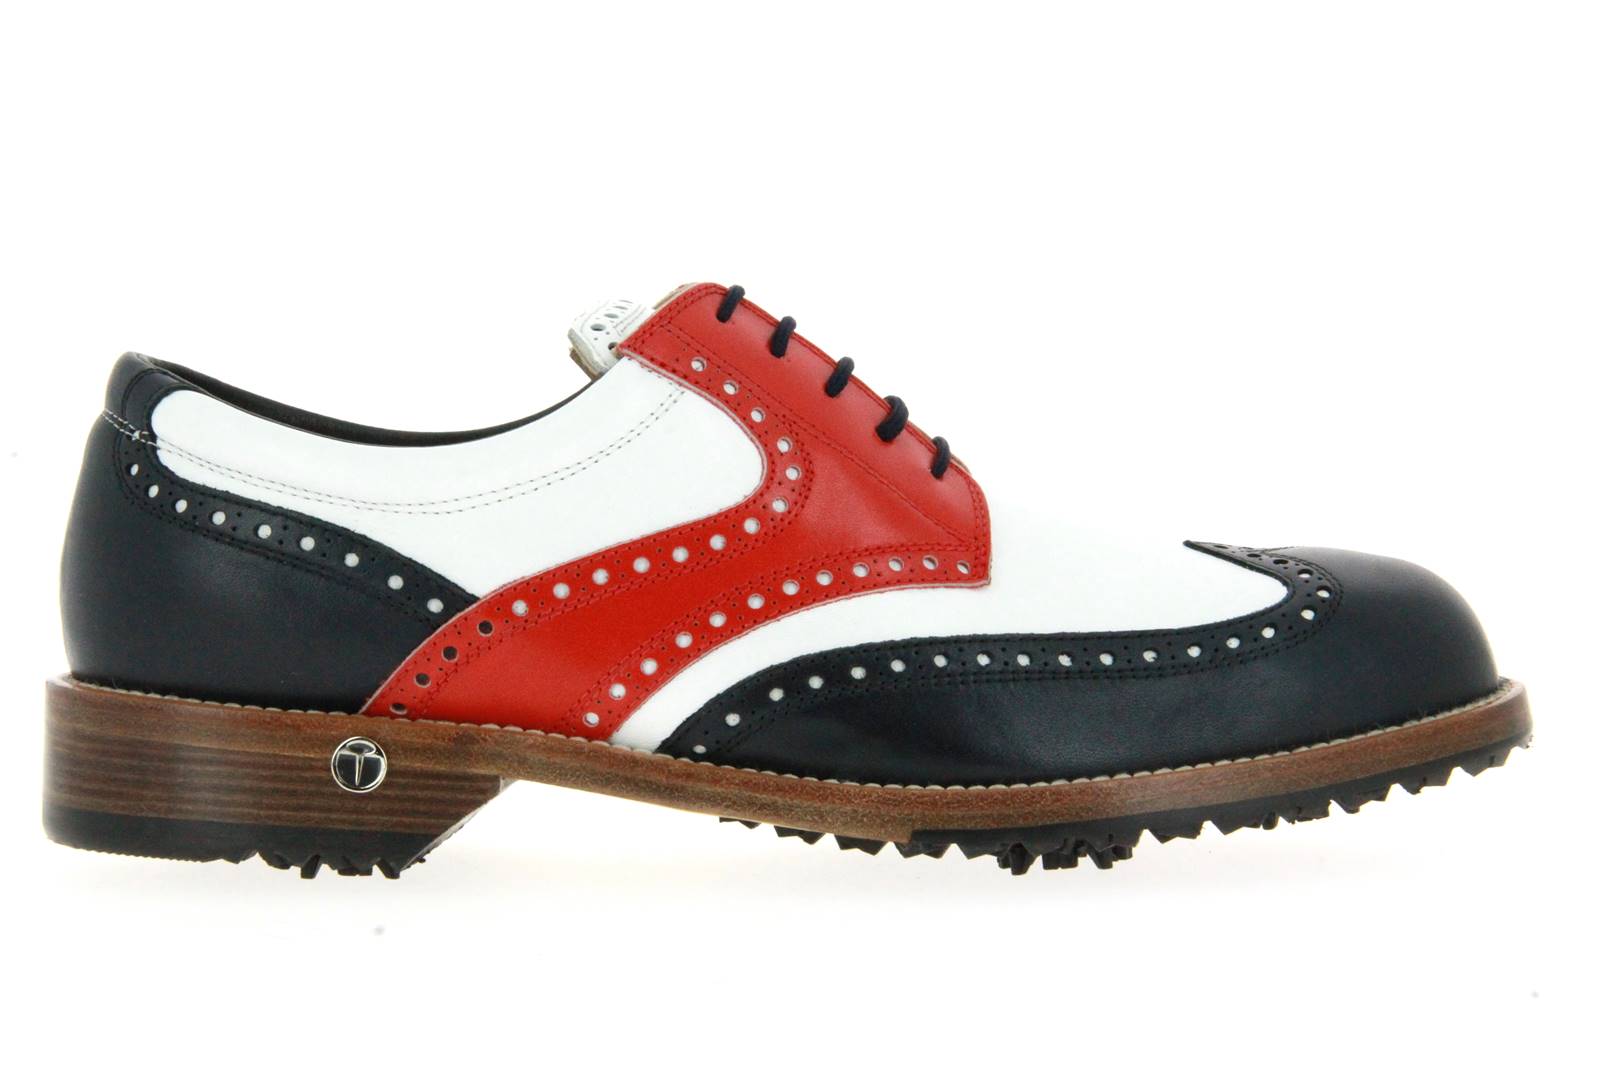 tee-golf-shoes-tommy-bianco-rosso-blu-2